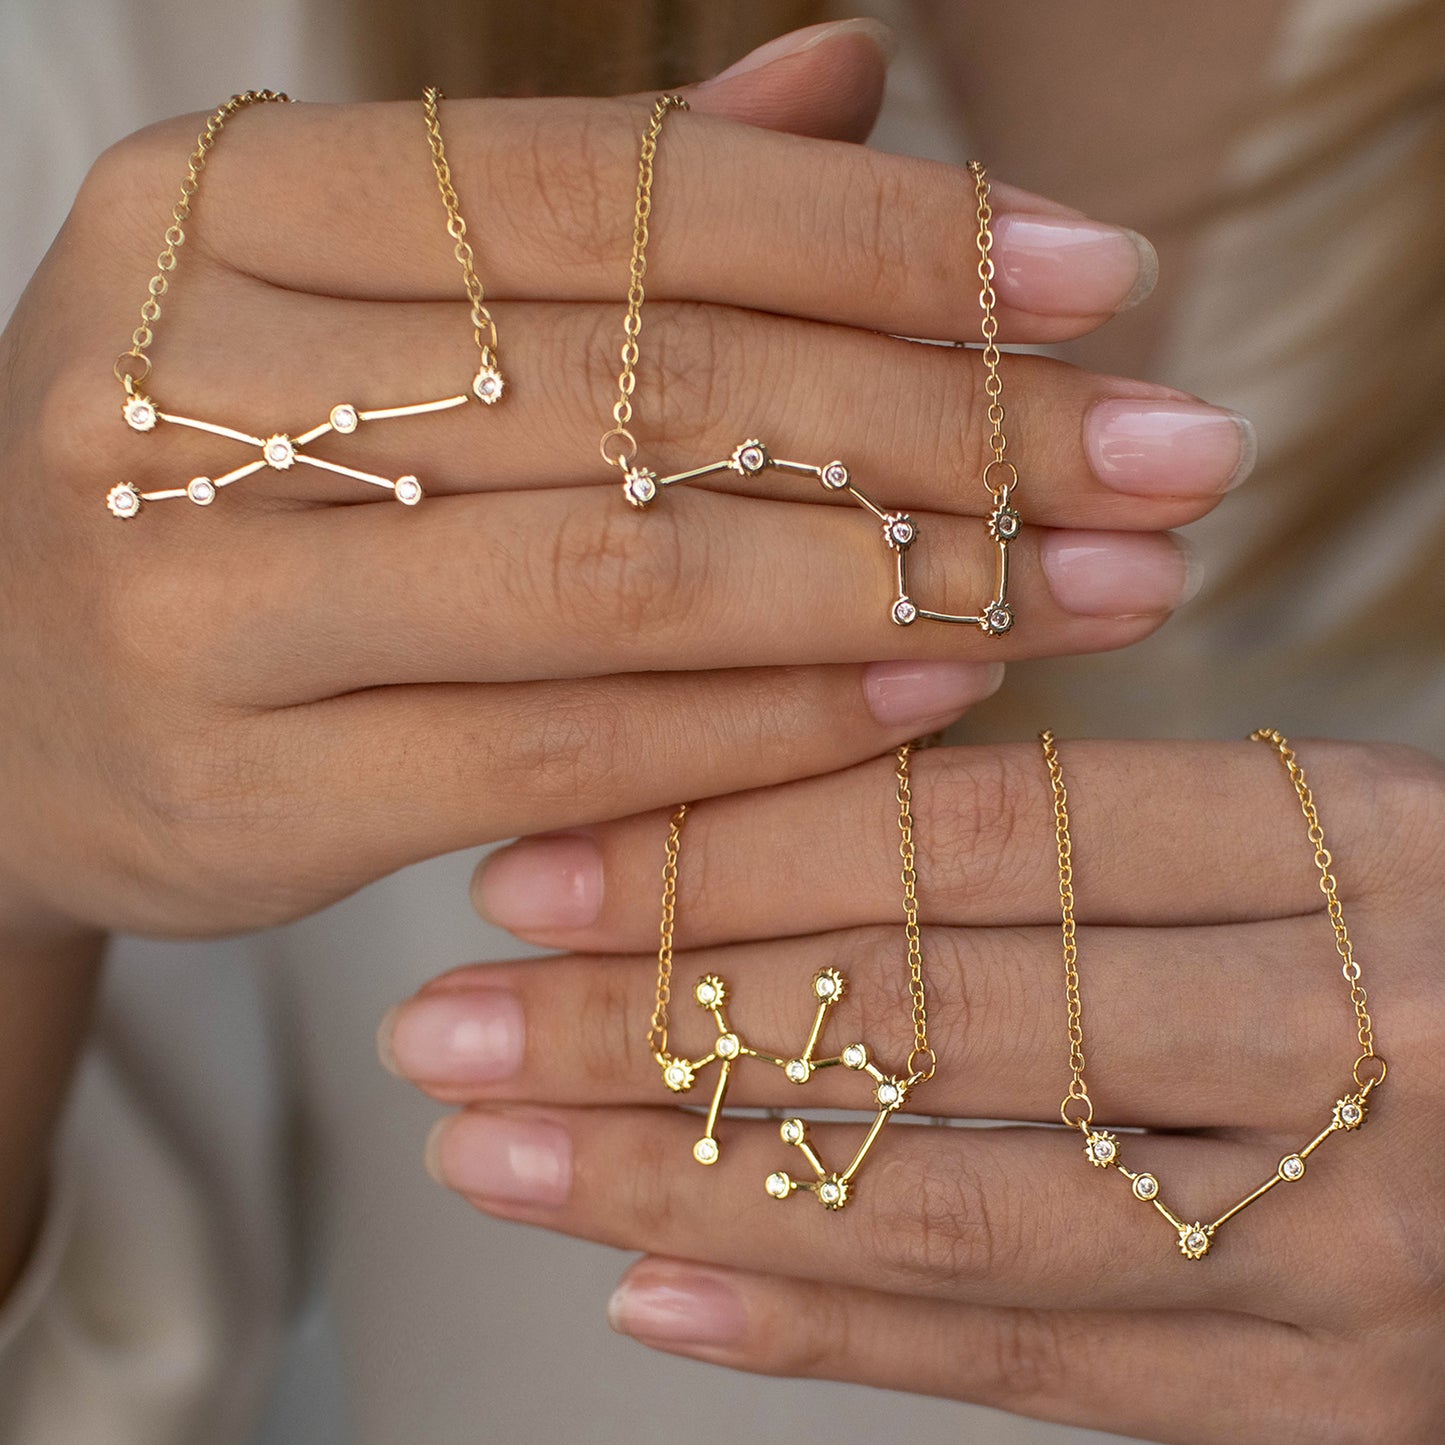 The showcase photos of different zodiac constellation charm.